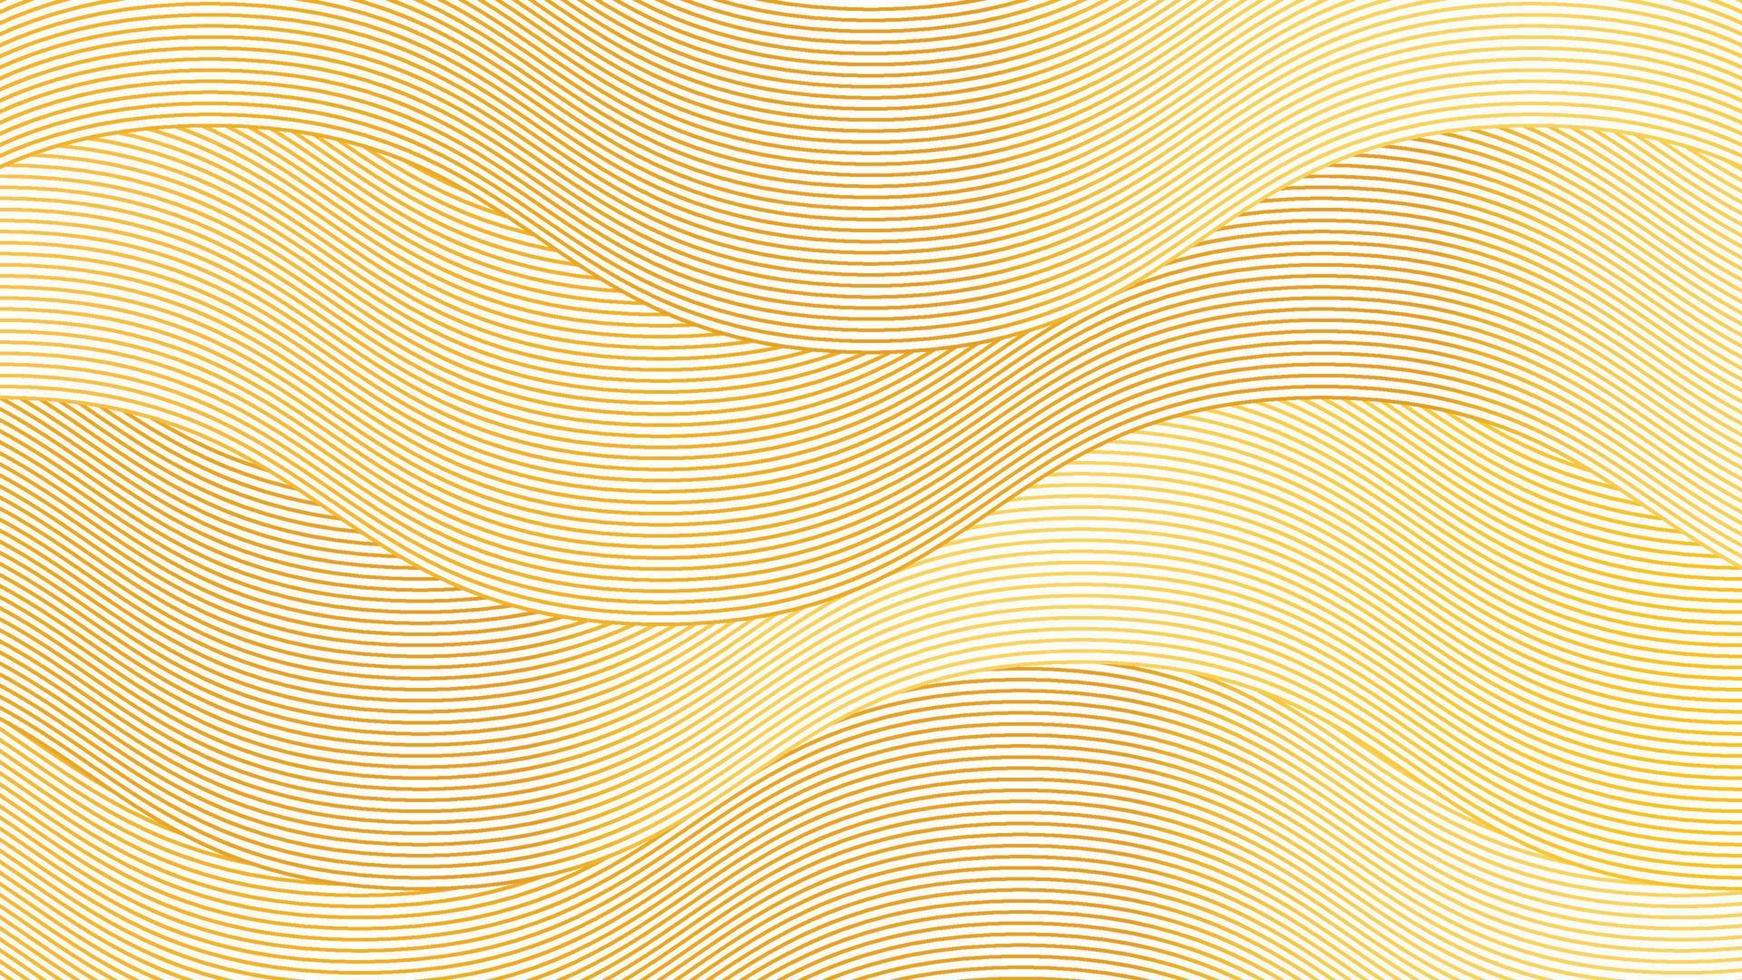 Abstract luxury light brown background with golden wavy line texture vector